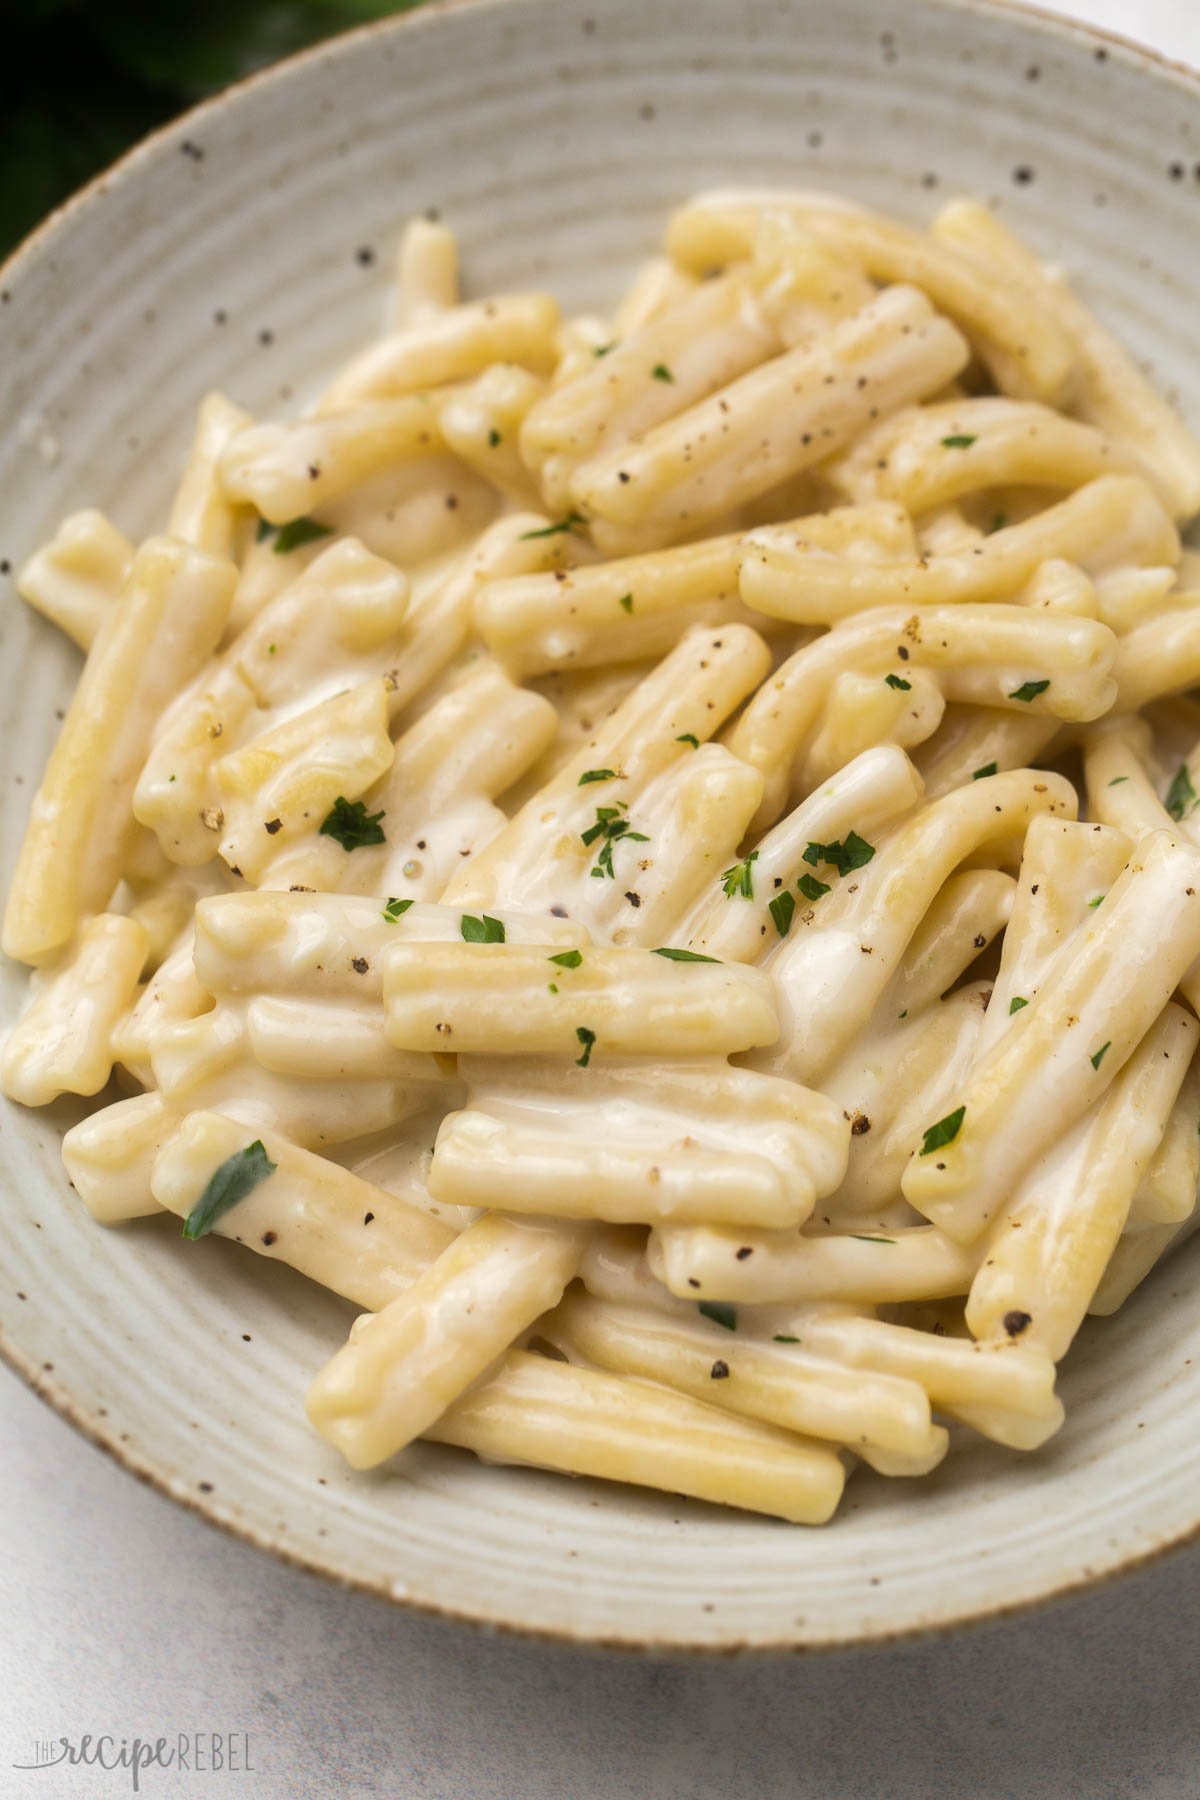 close up view of a plate of creamy garlic gemelli pasta with parsley sprinkled on top.